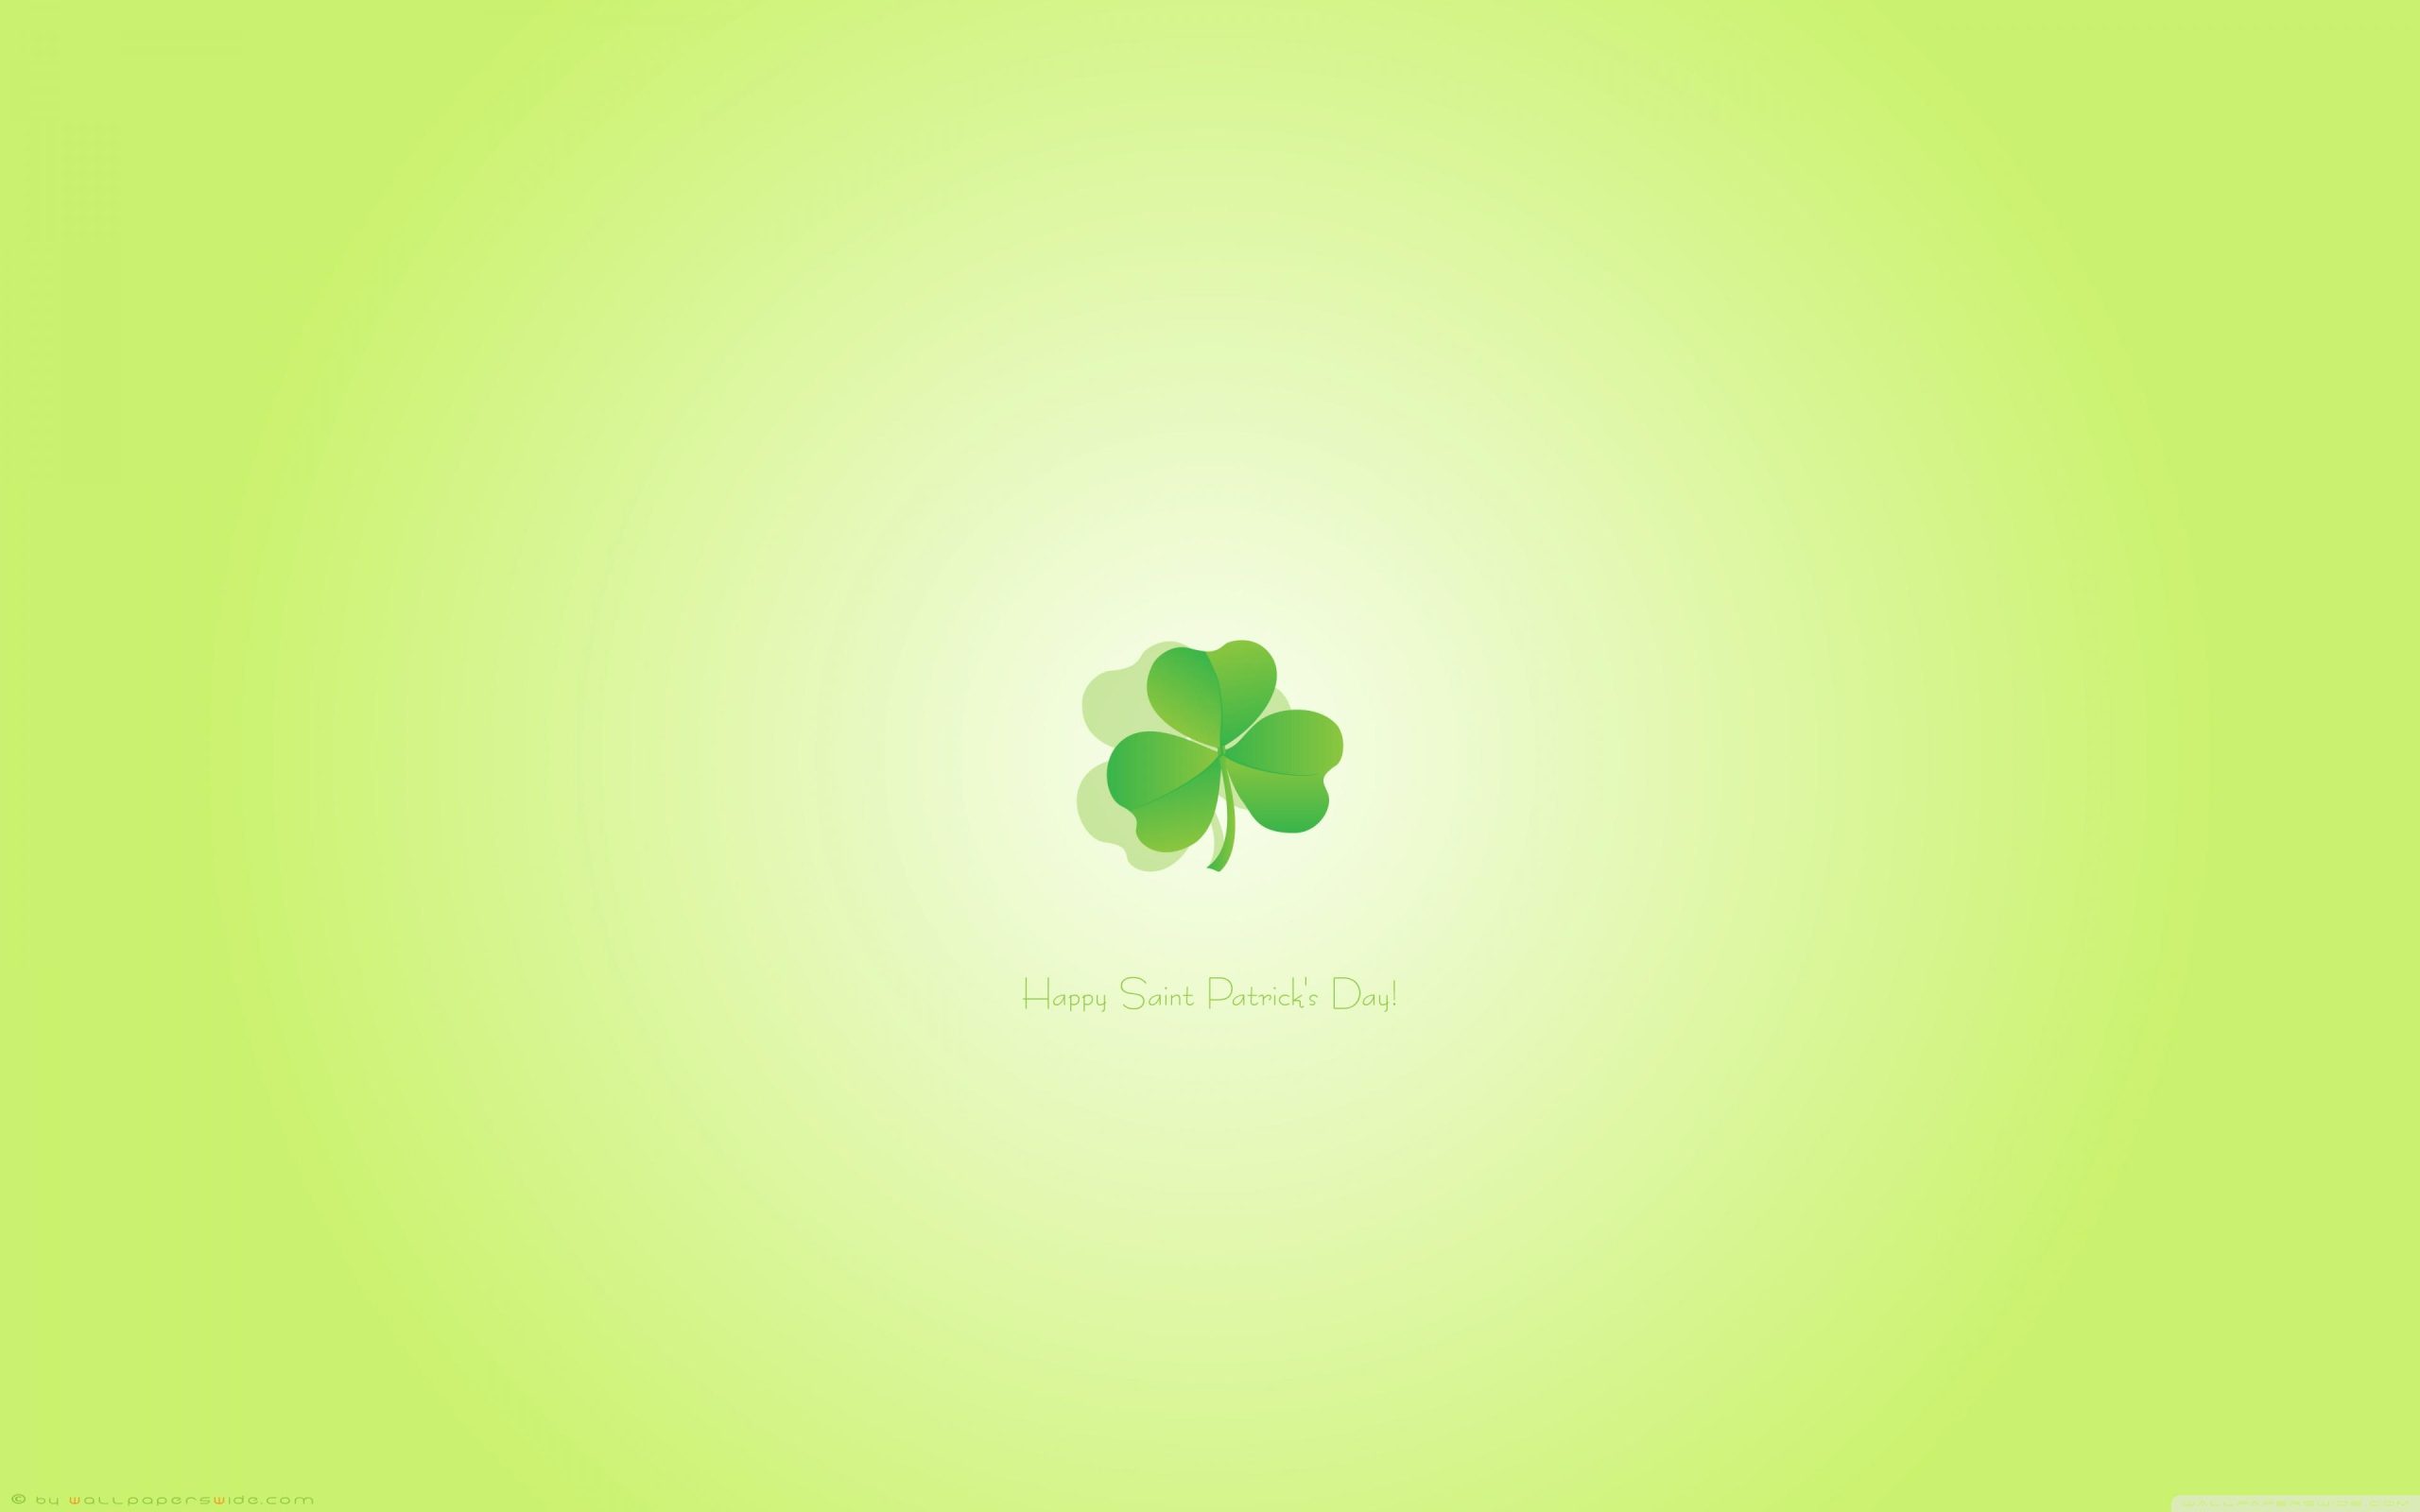 Cute St Patrick's Day ipad wallpaper, Cute St Patrick's Day, Anime